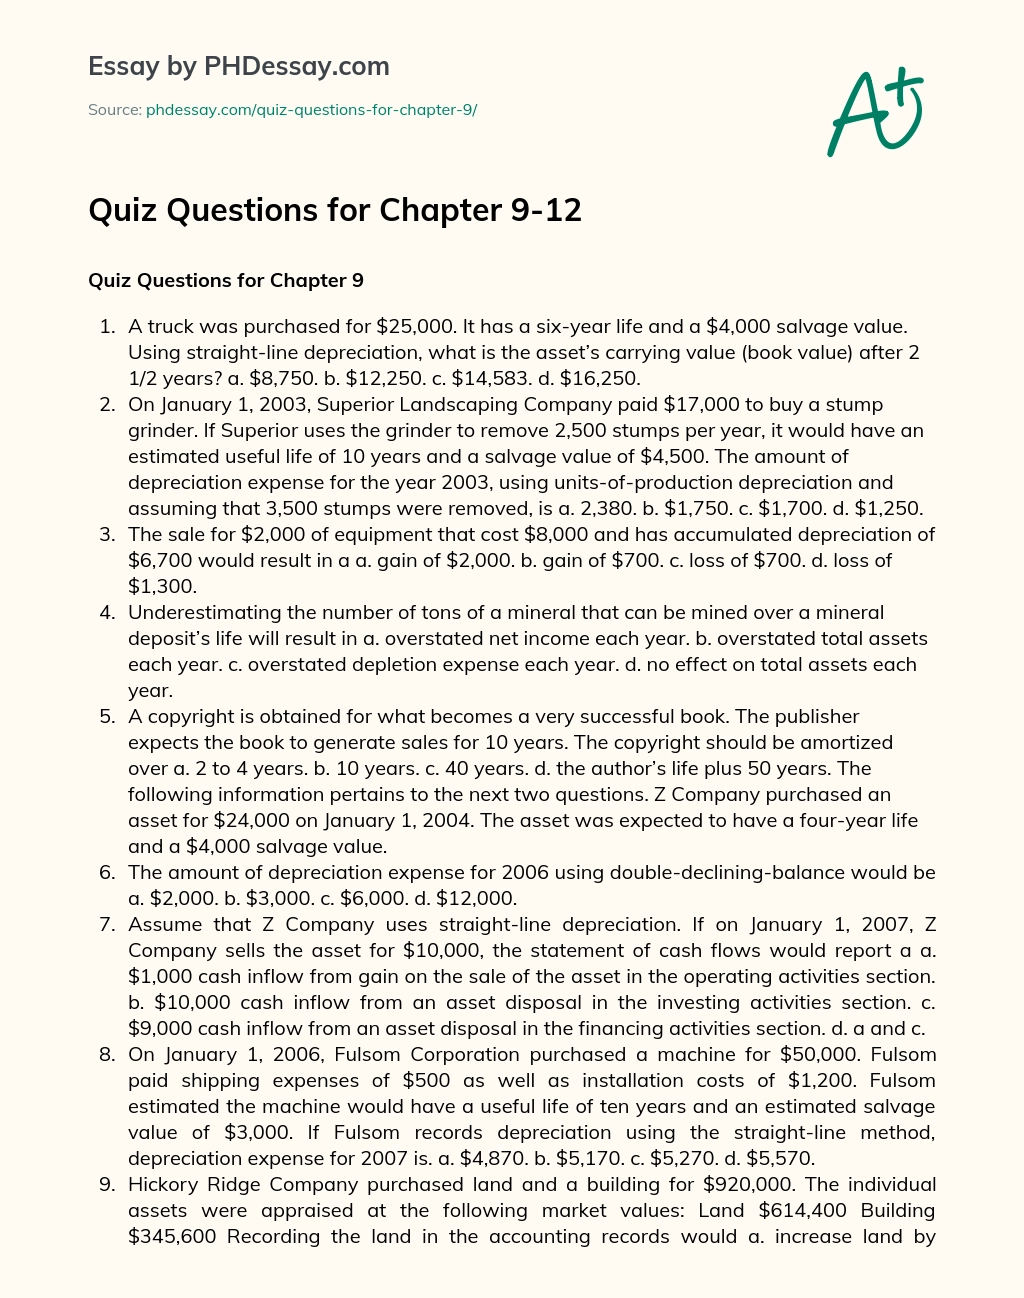 Quiz Questions for Chapter 9-12 essay